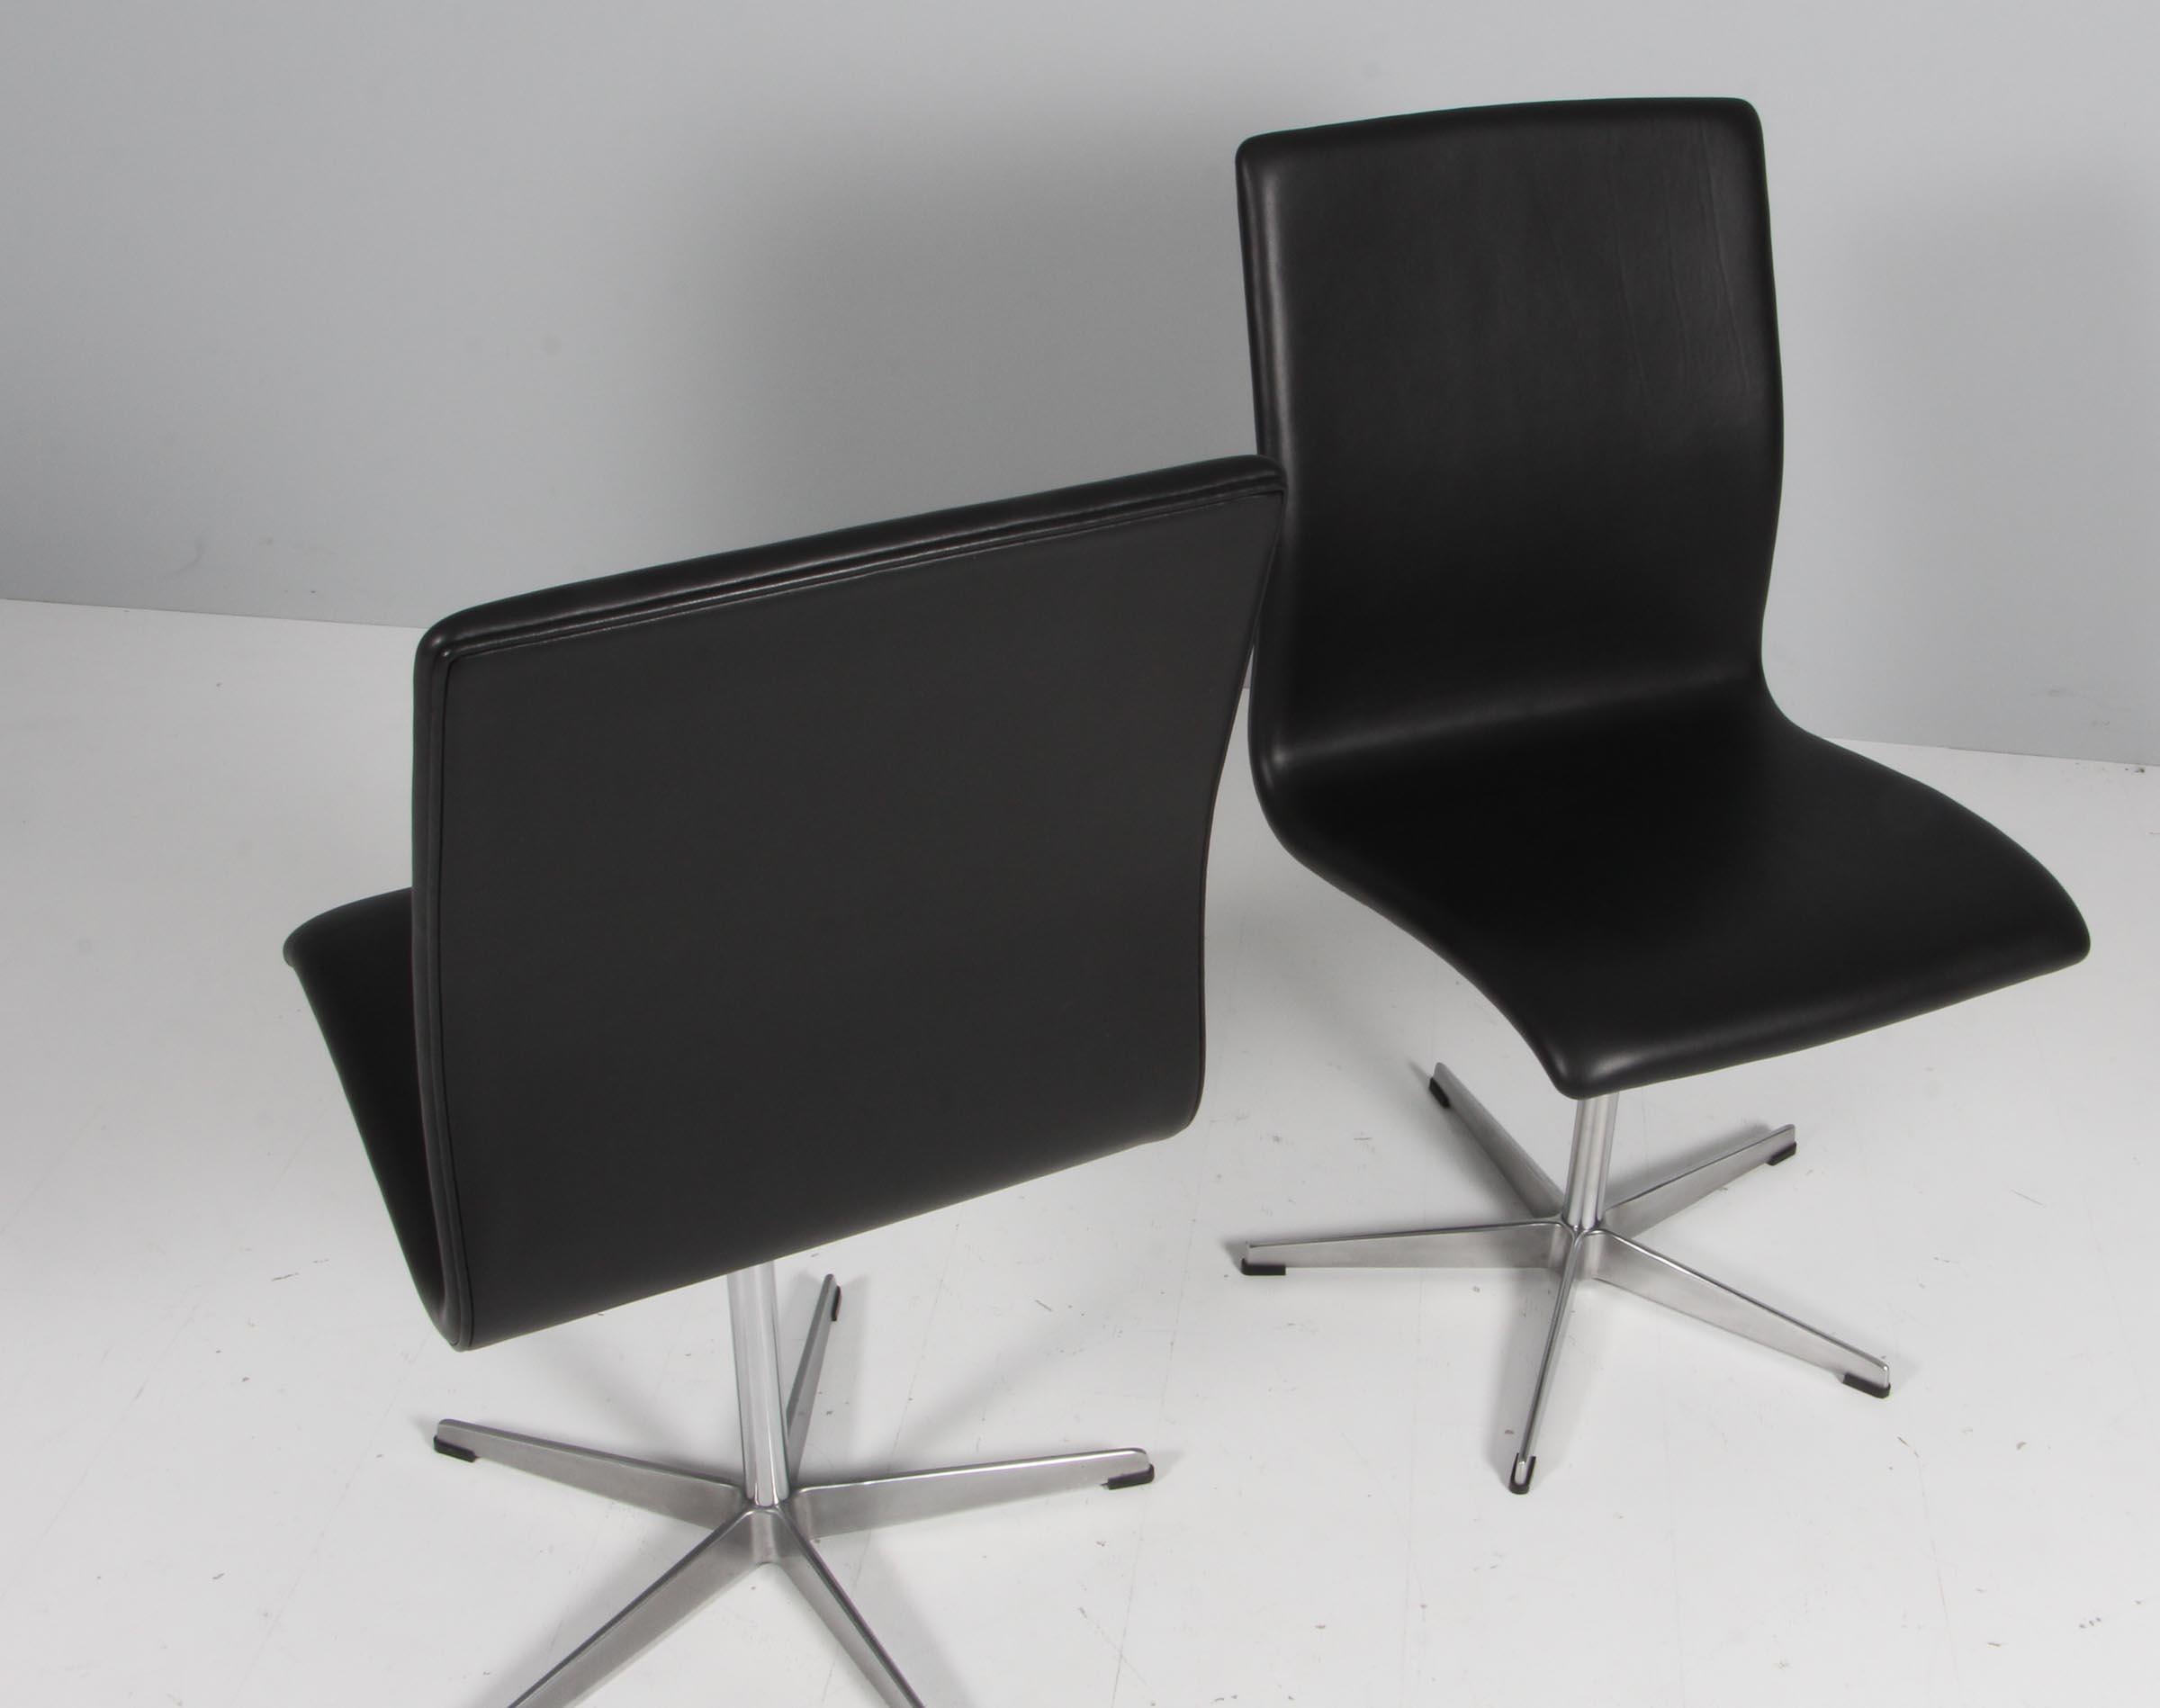 Arne Jacobsen Oxford chair five star base in aluminum.

New upholstered with black pure aniline leather

Made by Fritz Hansen.

Original designed for the Oxford university.